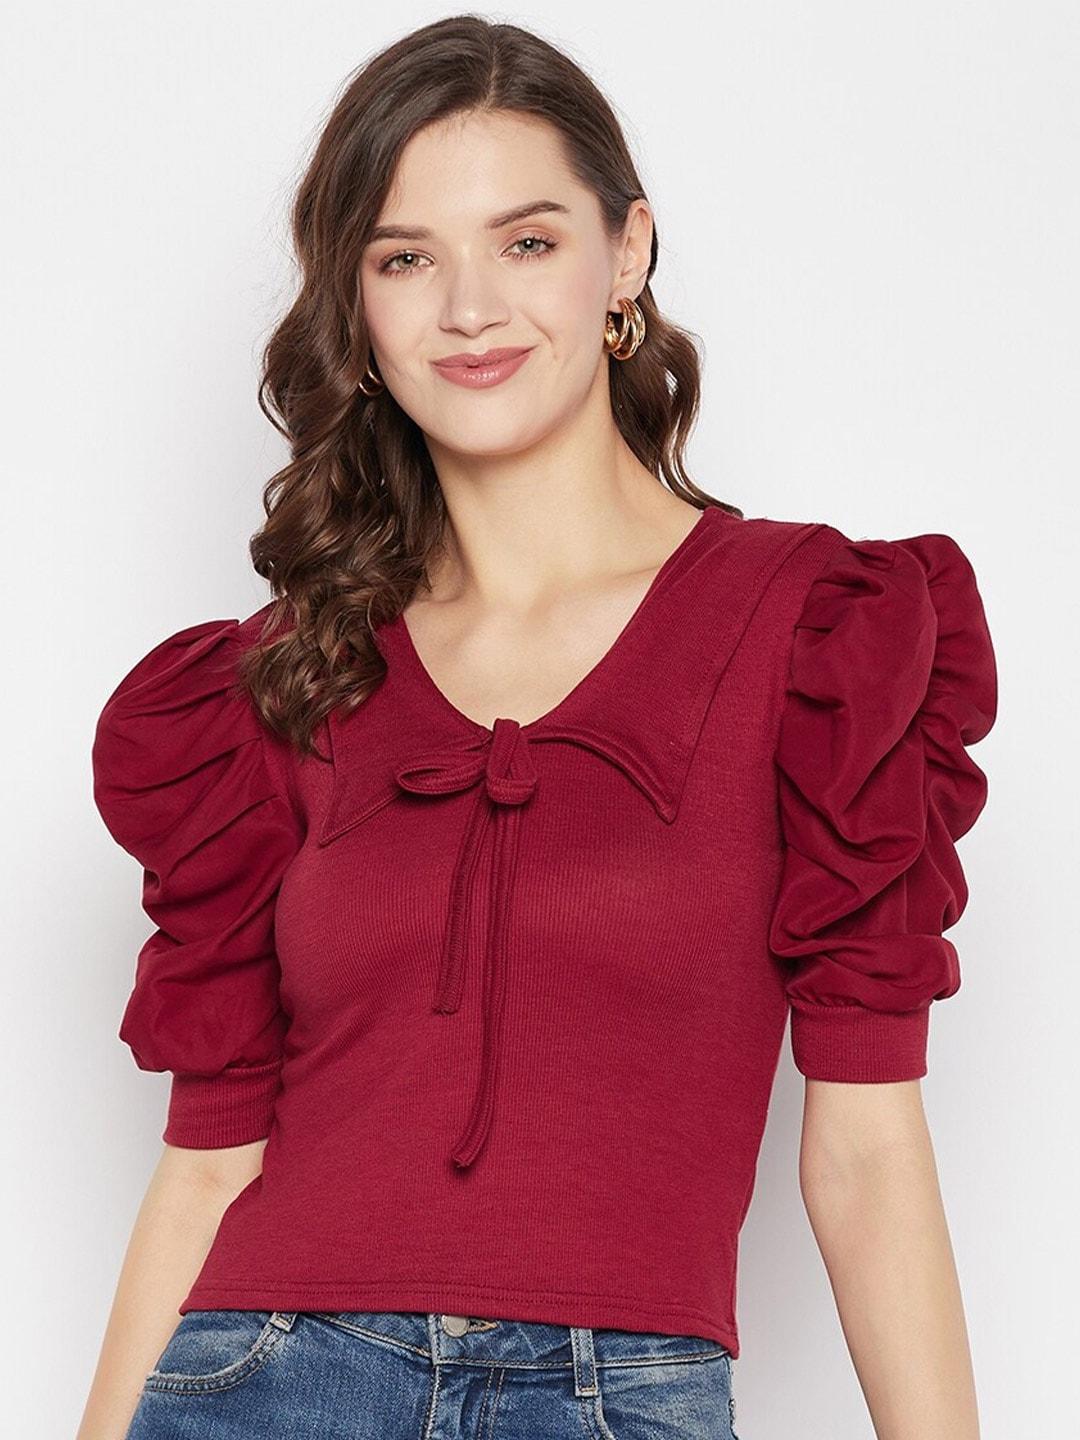 clora creation v-neck ruched puff sleeve regular top